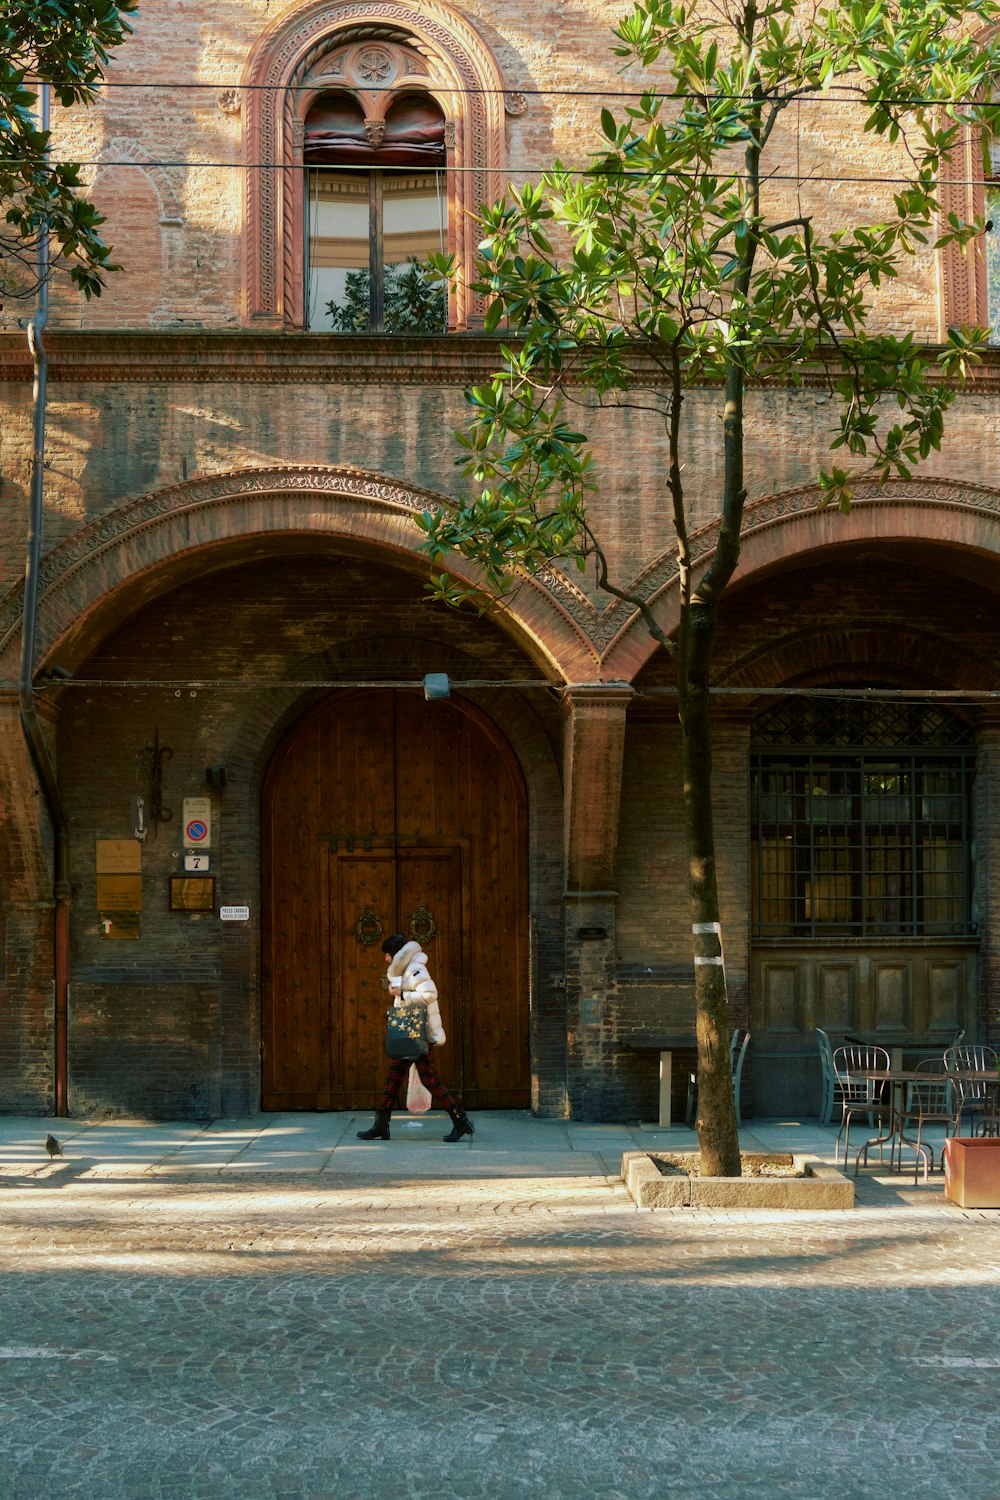 a person walking in front of a brick building